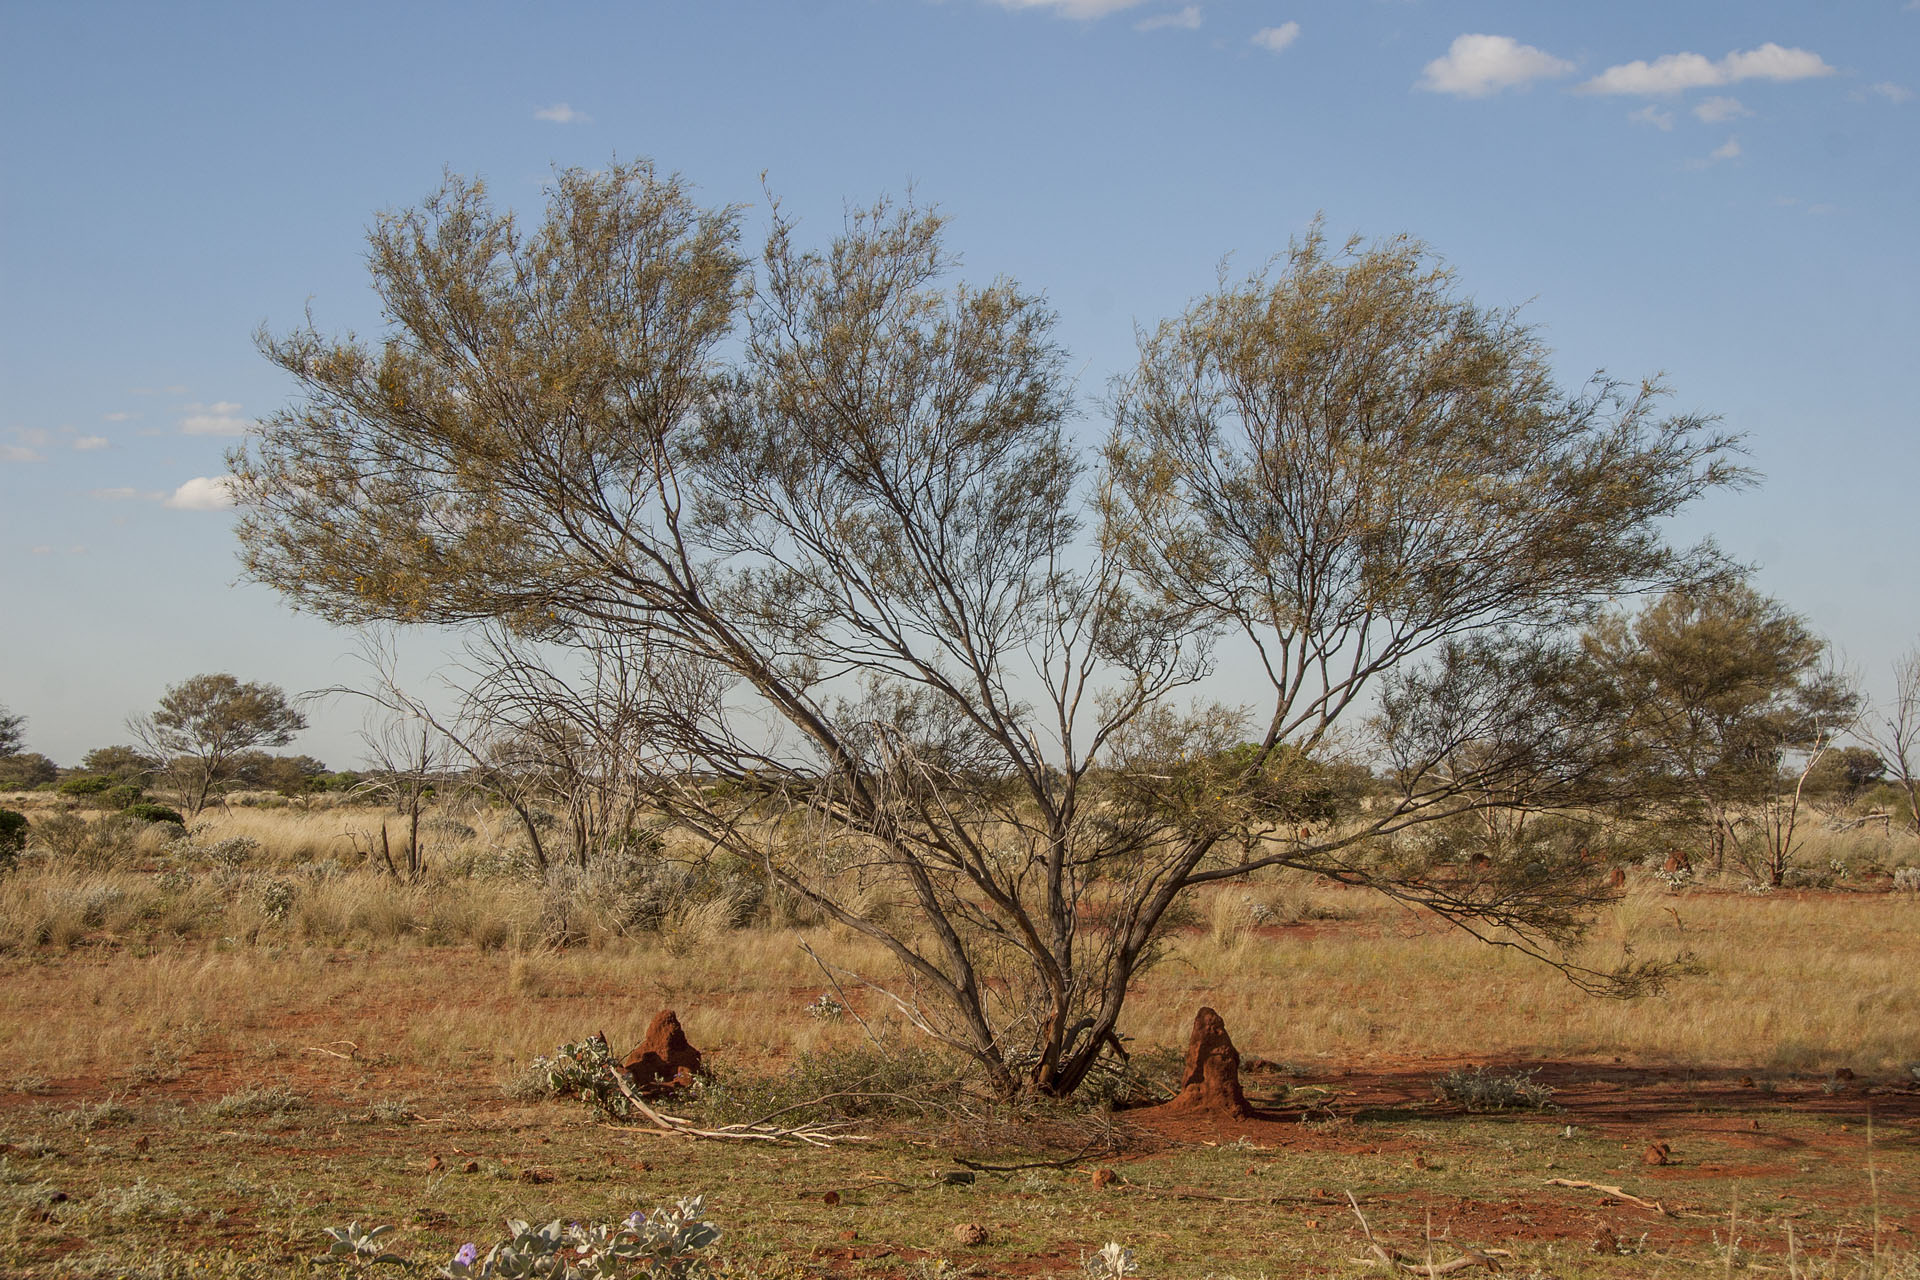 The roadside termite mounds: it's time for them already.